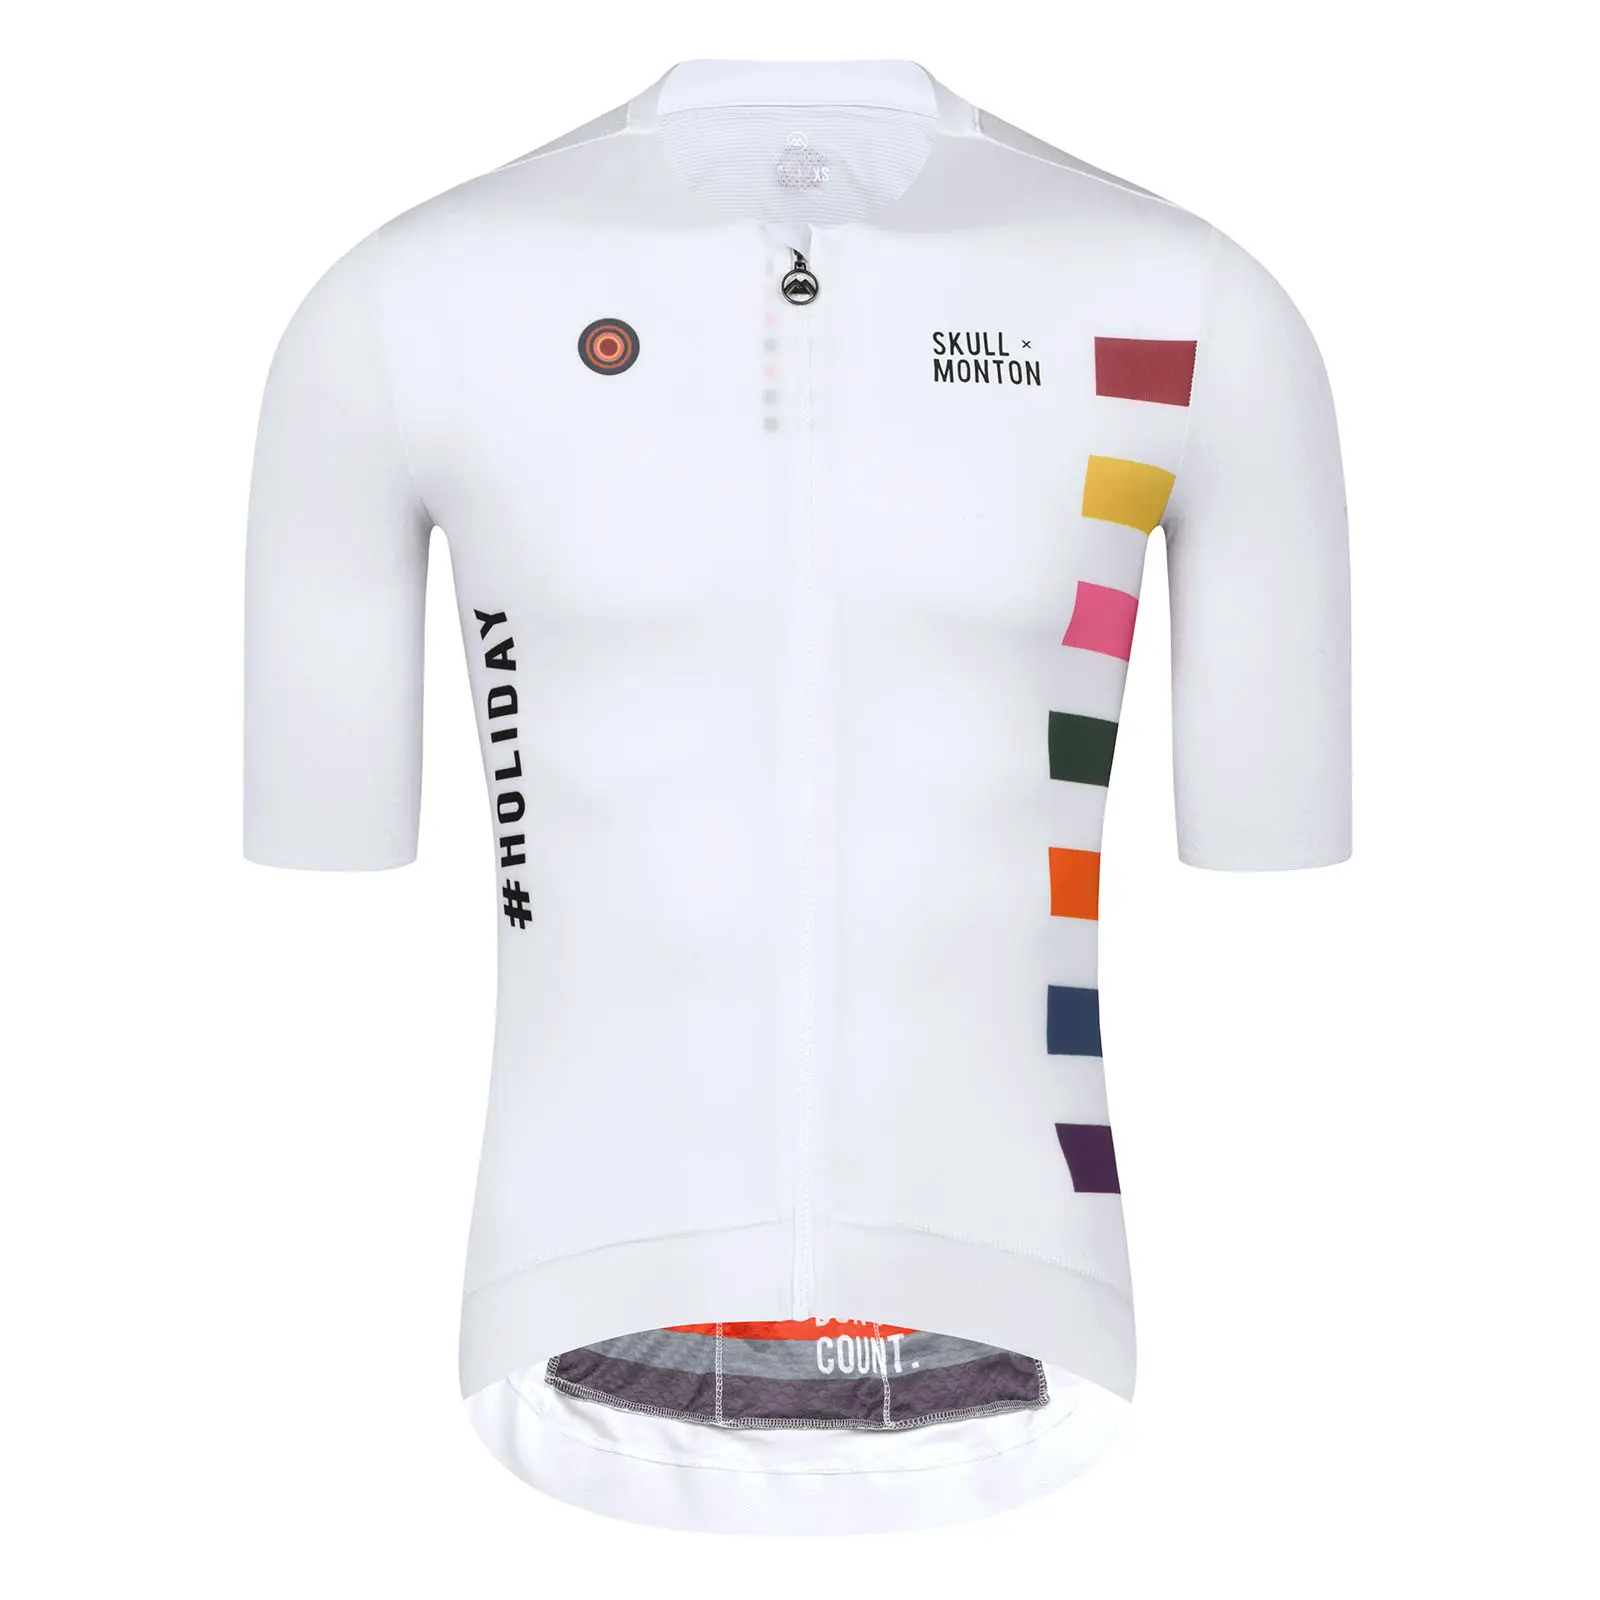 Monton OEM custom Pro team road bicycle jersey cycling clothing tops jersey shirts cycling wear customized cycling jersey